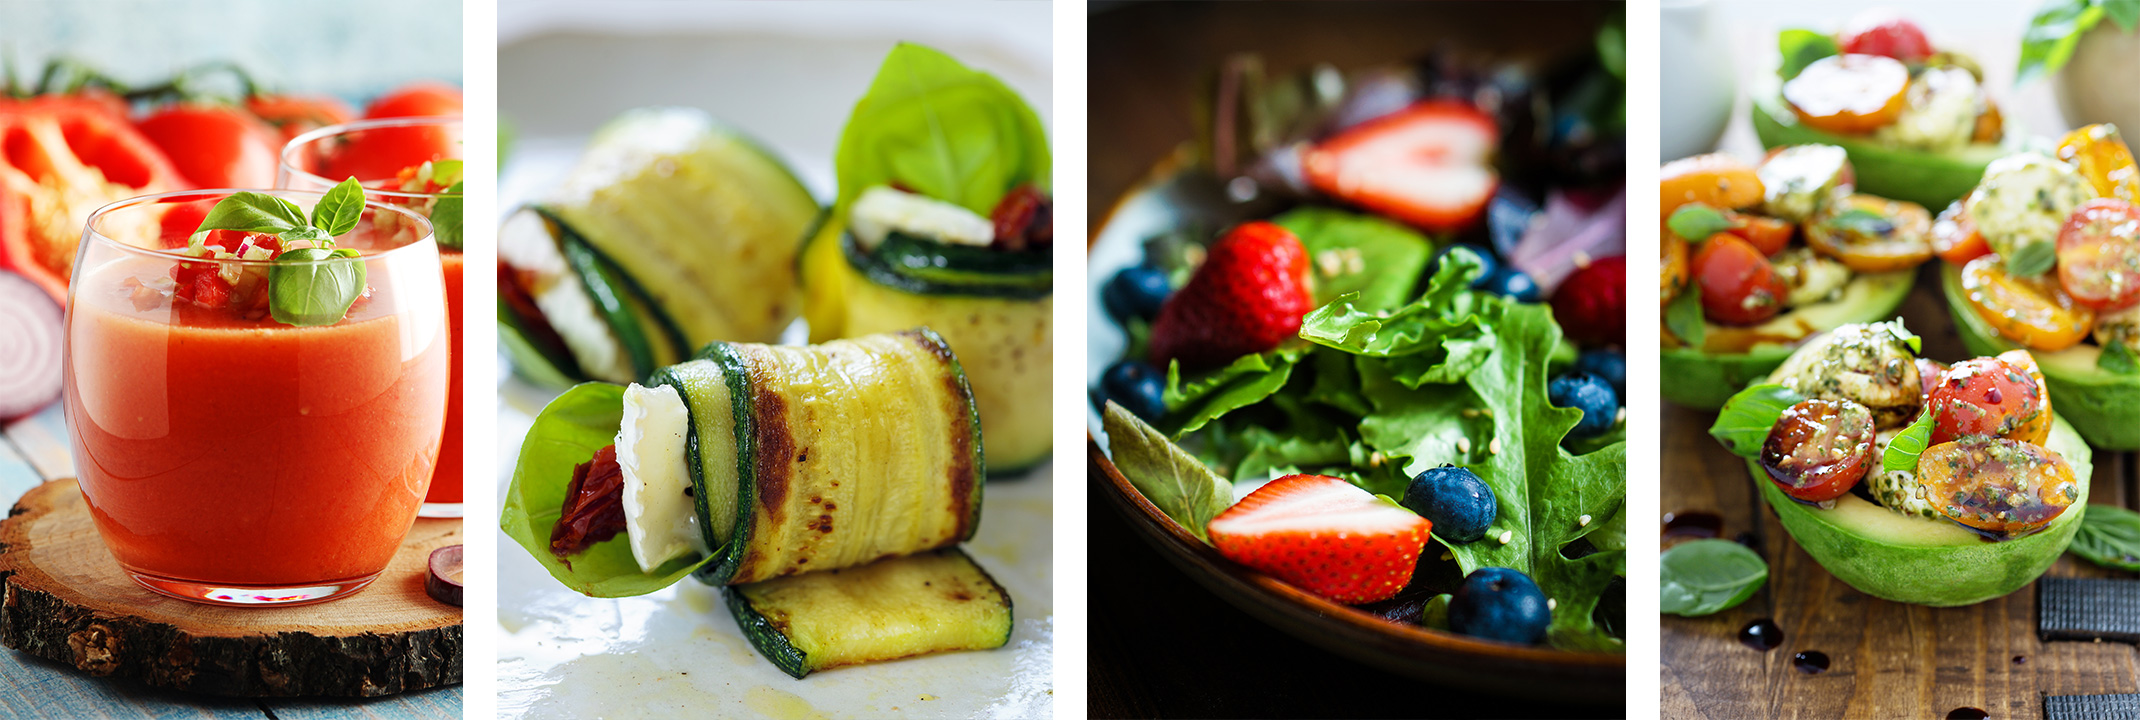 4 different vegetarian dishes made with garden-fresh ingredients.